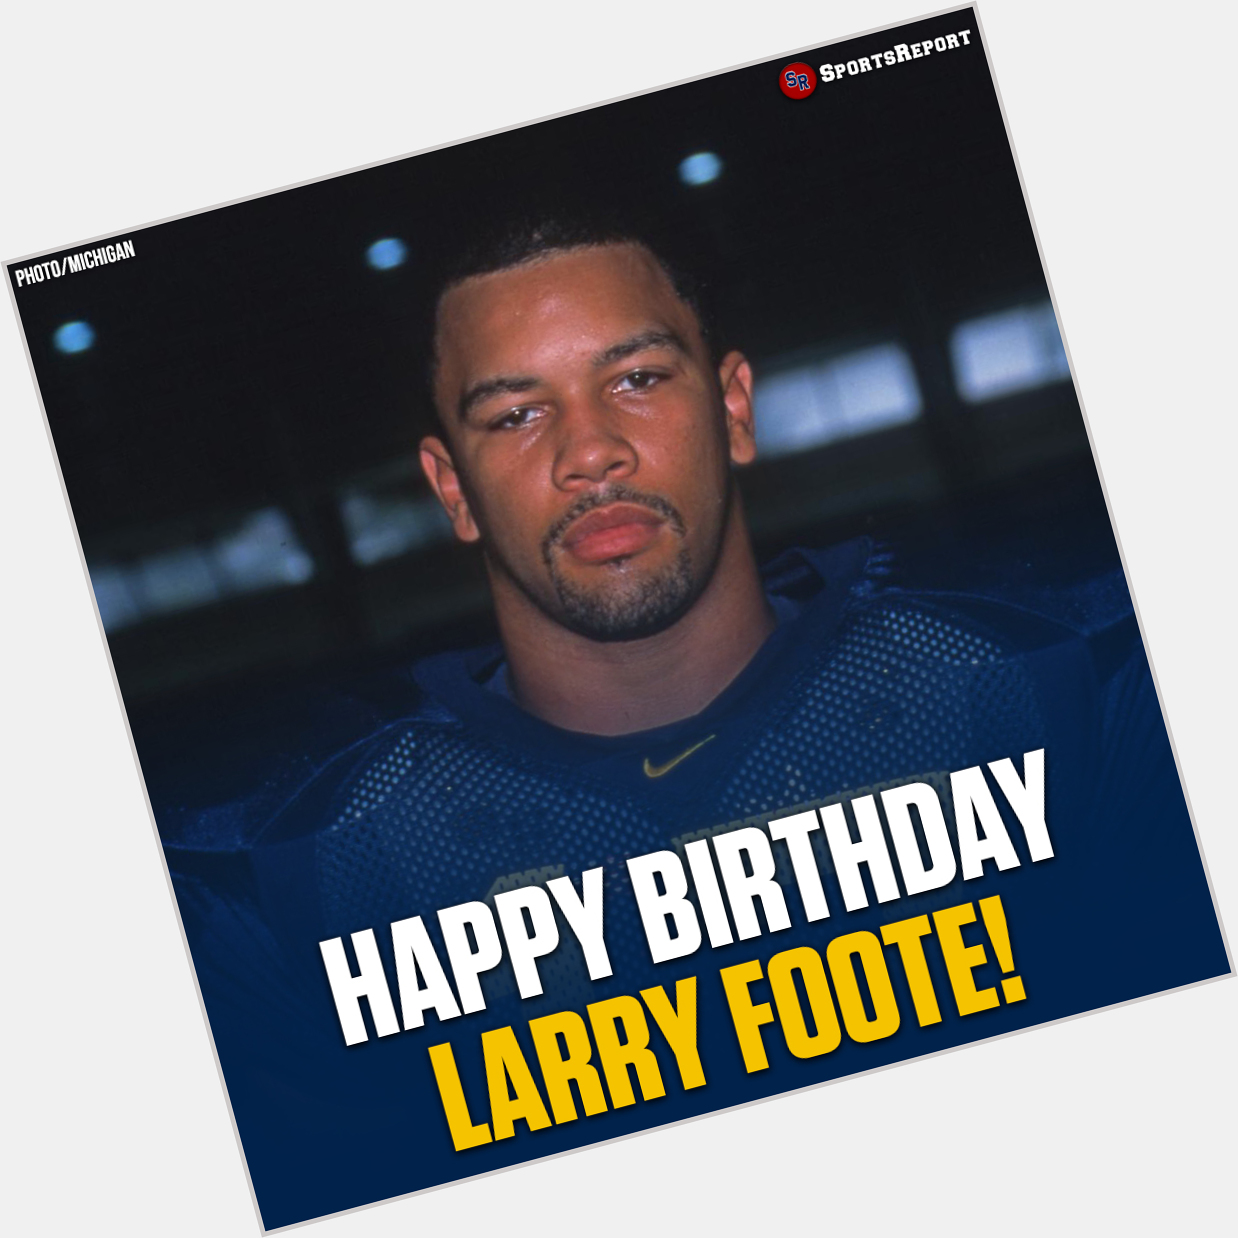  Fans, let\s wish great Larry Foote a Happy Birthday! 